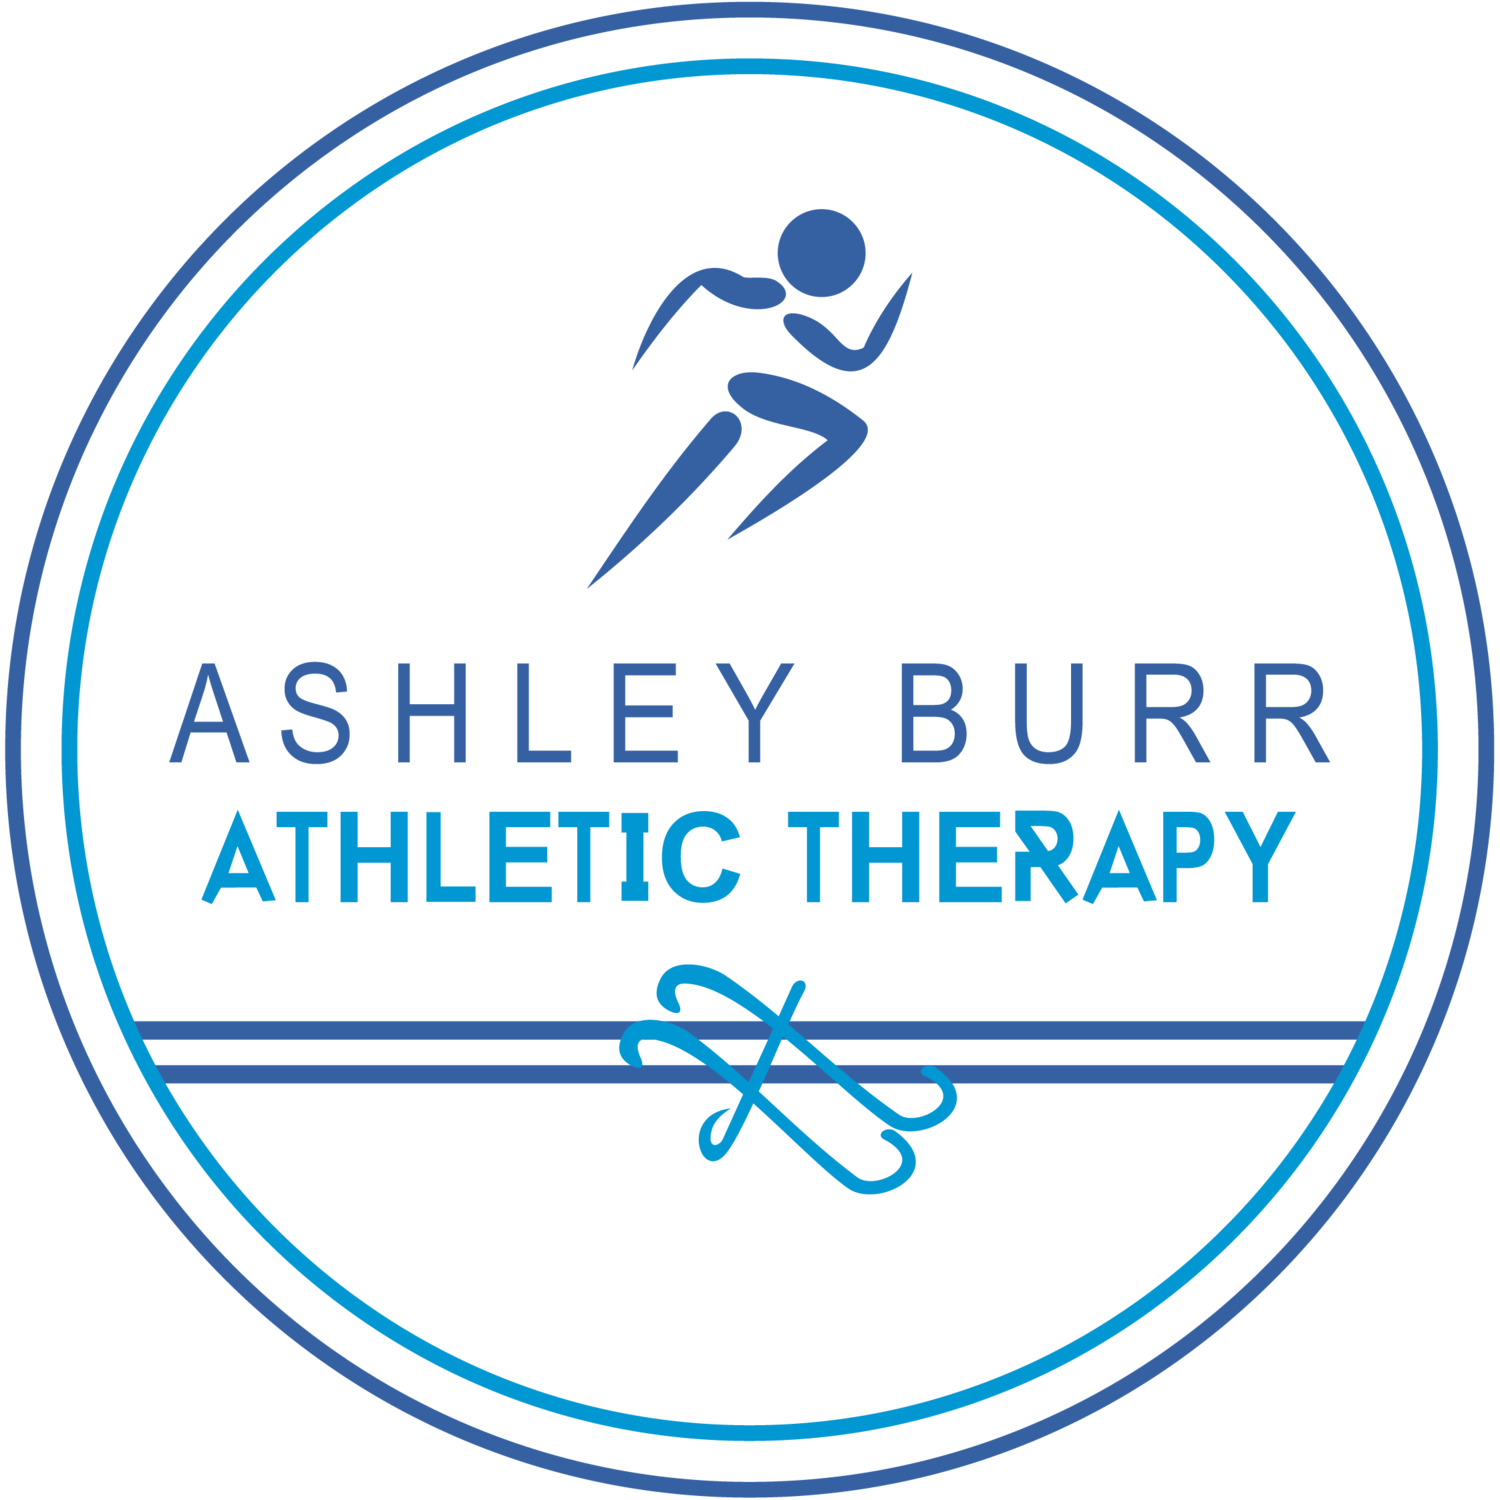 Ashley Burr Athletic Therapy